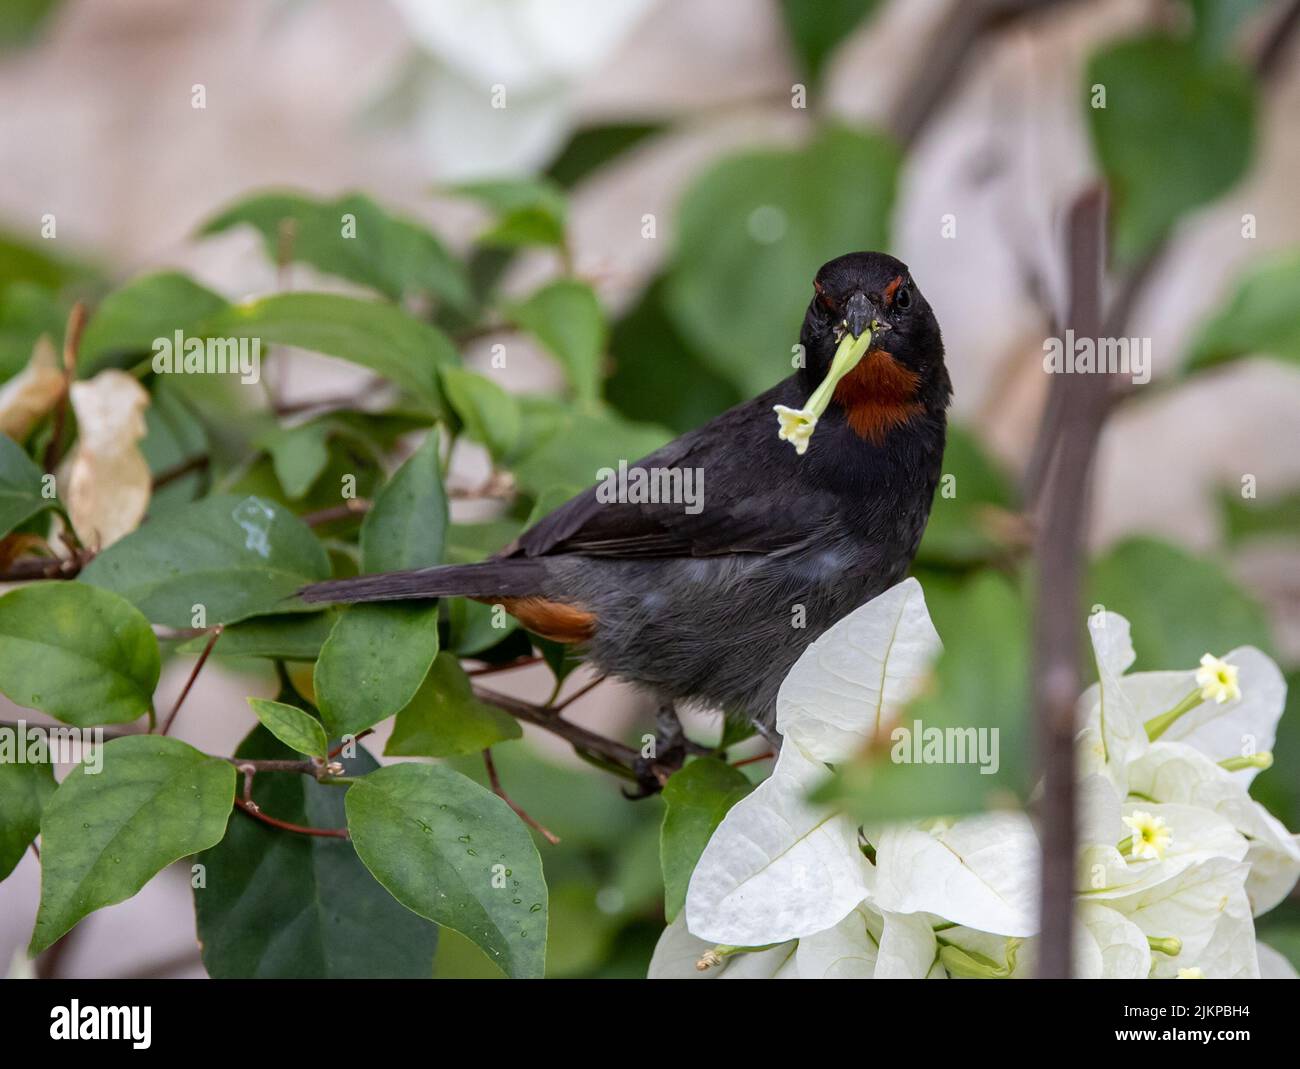 A closeup shot of a Lesser Antillean bullfinch standing on a jasmine tree in the garden with a blurred background Stock Photo